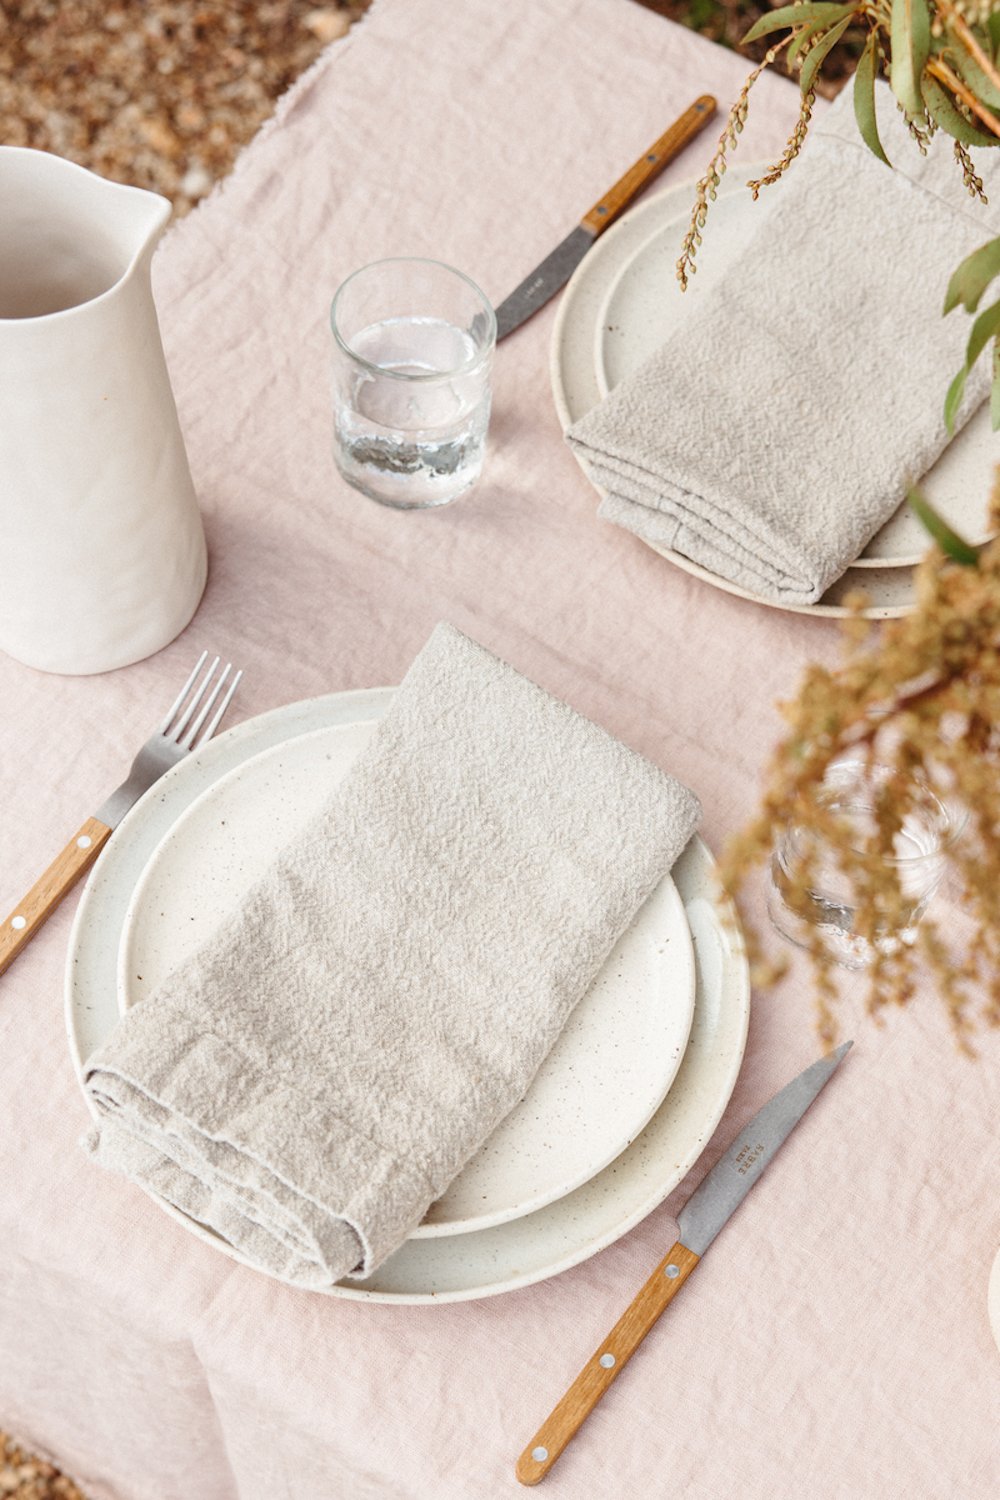 Simple table setting on pink linen tablecloth with two white plates, gray linen napkins, forks, and knives.